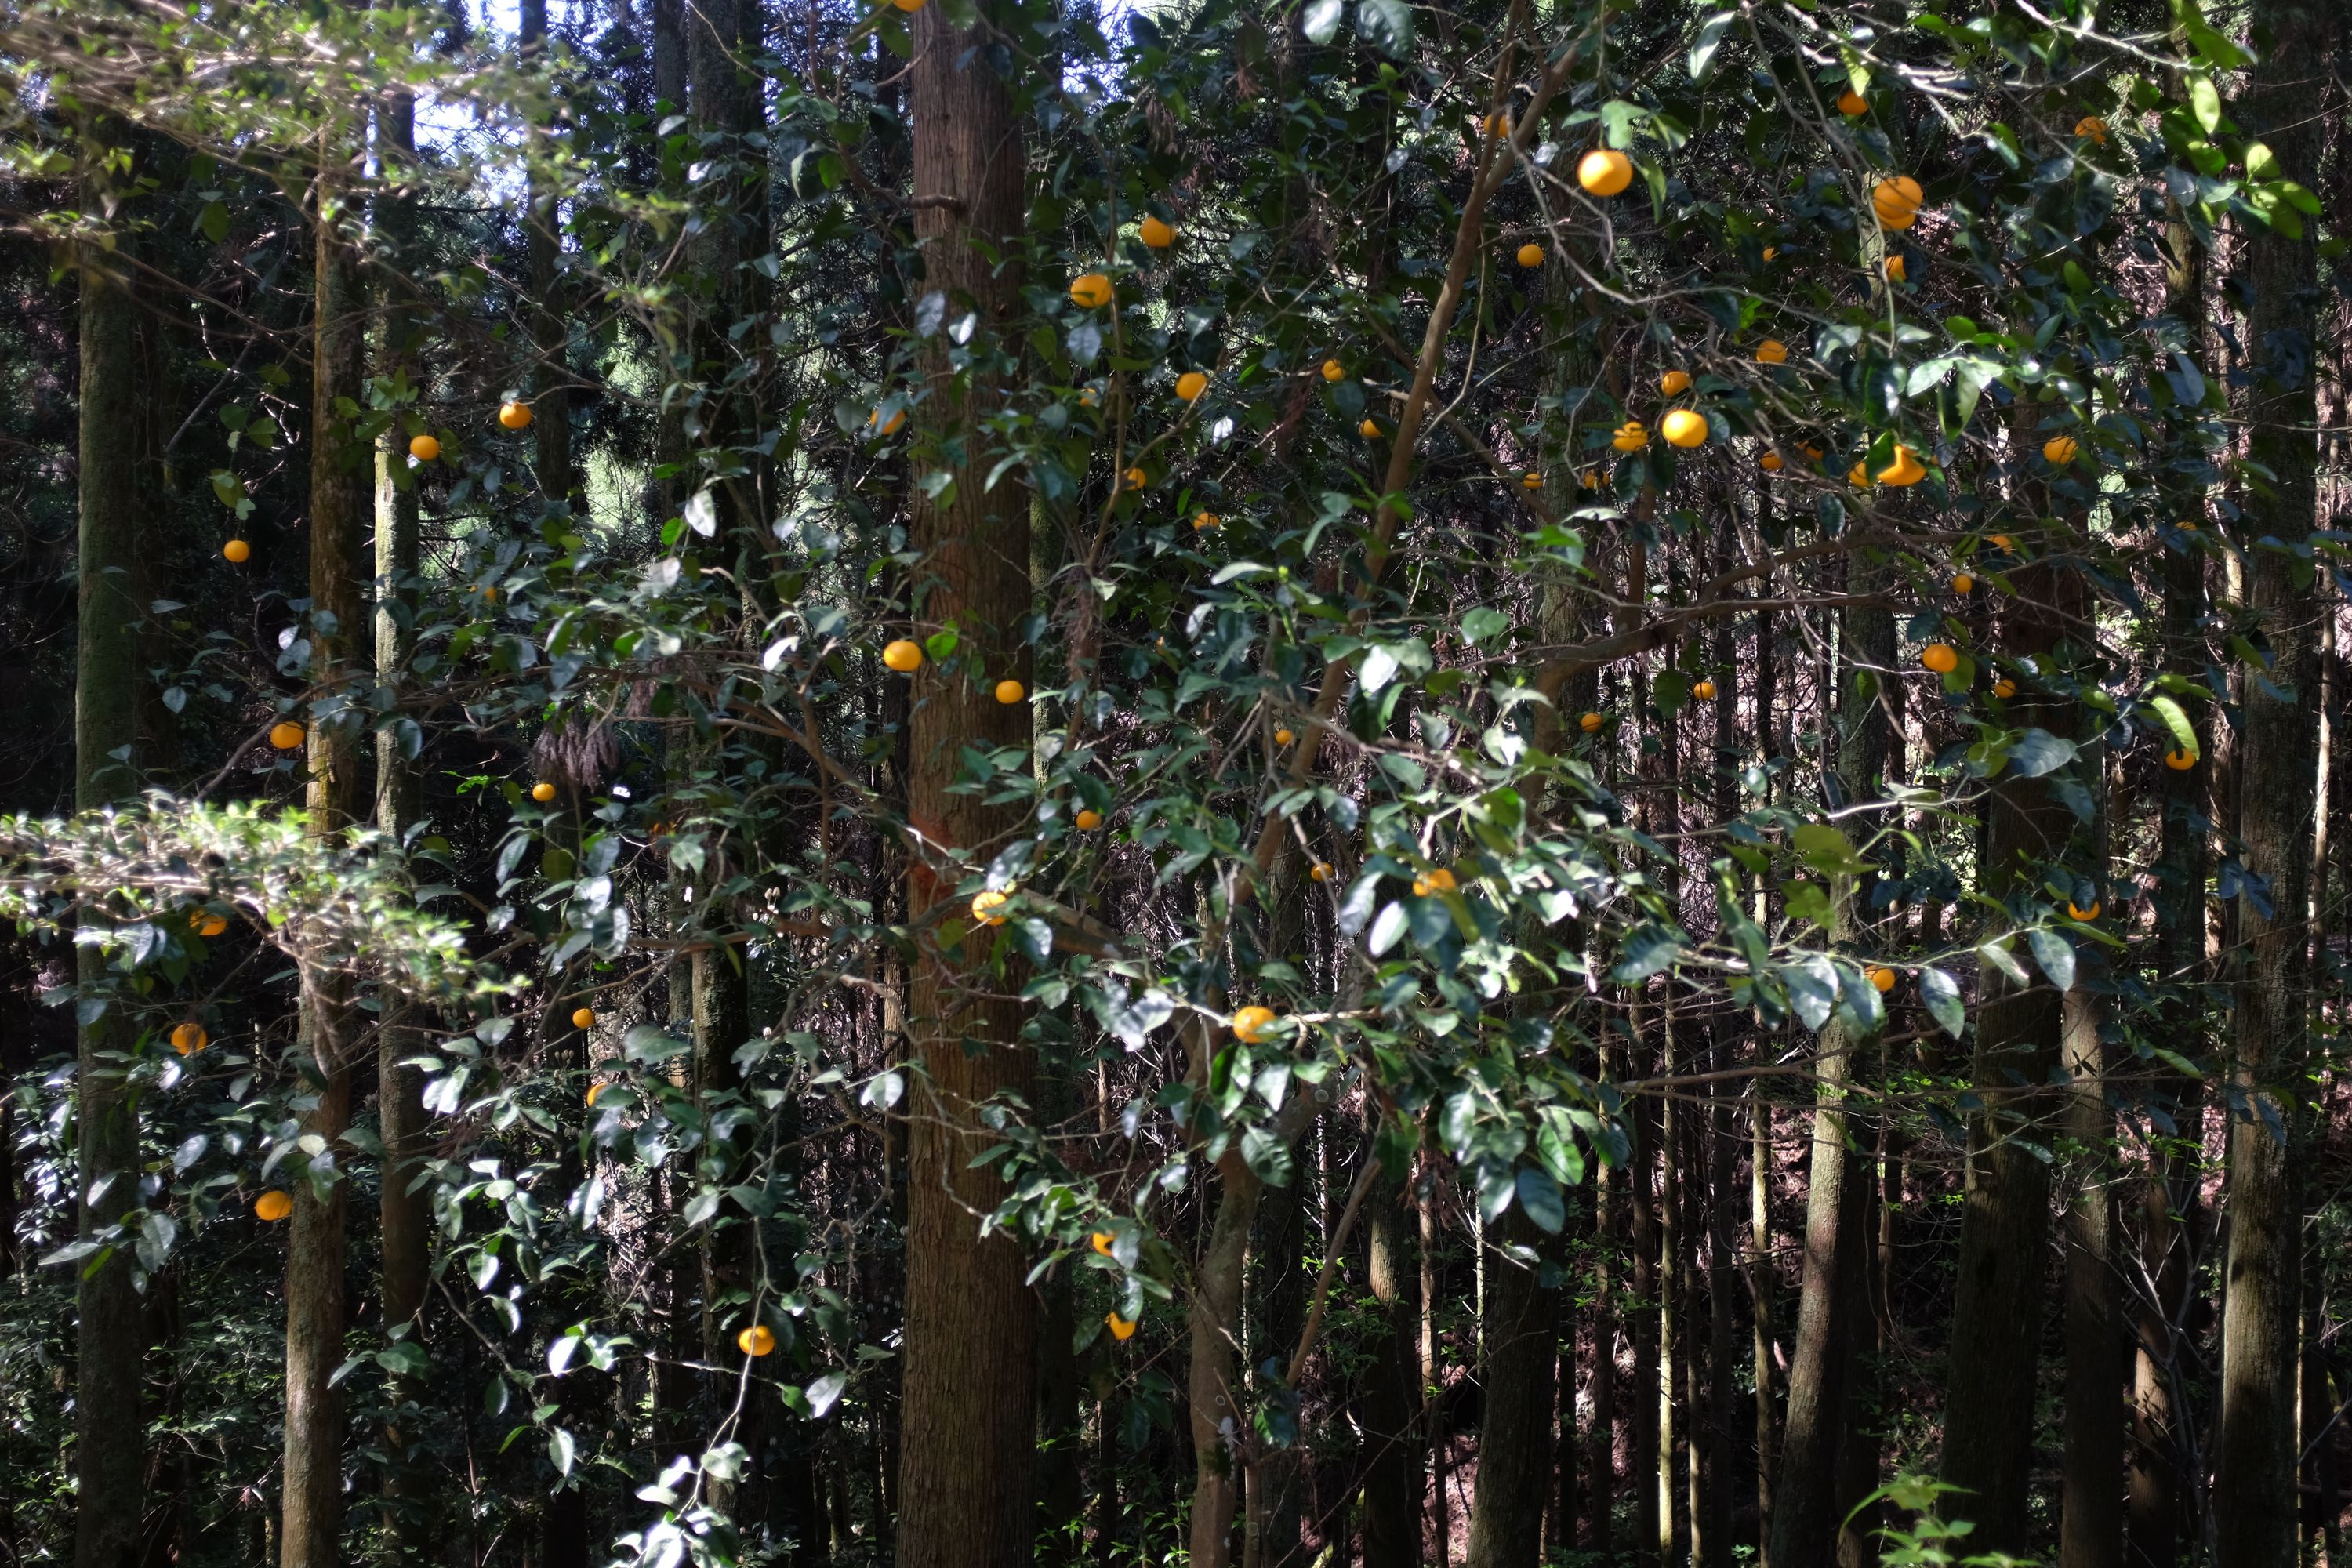 An orange tree with a lot of fruit in front of a dense grove of cedars.